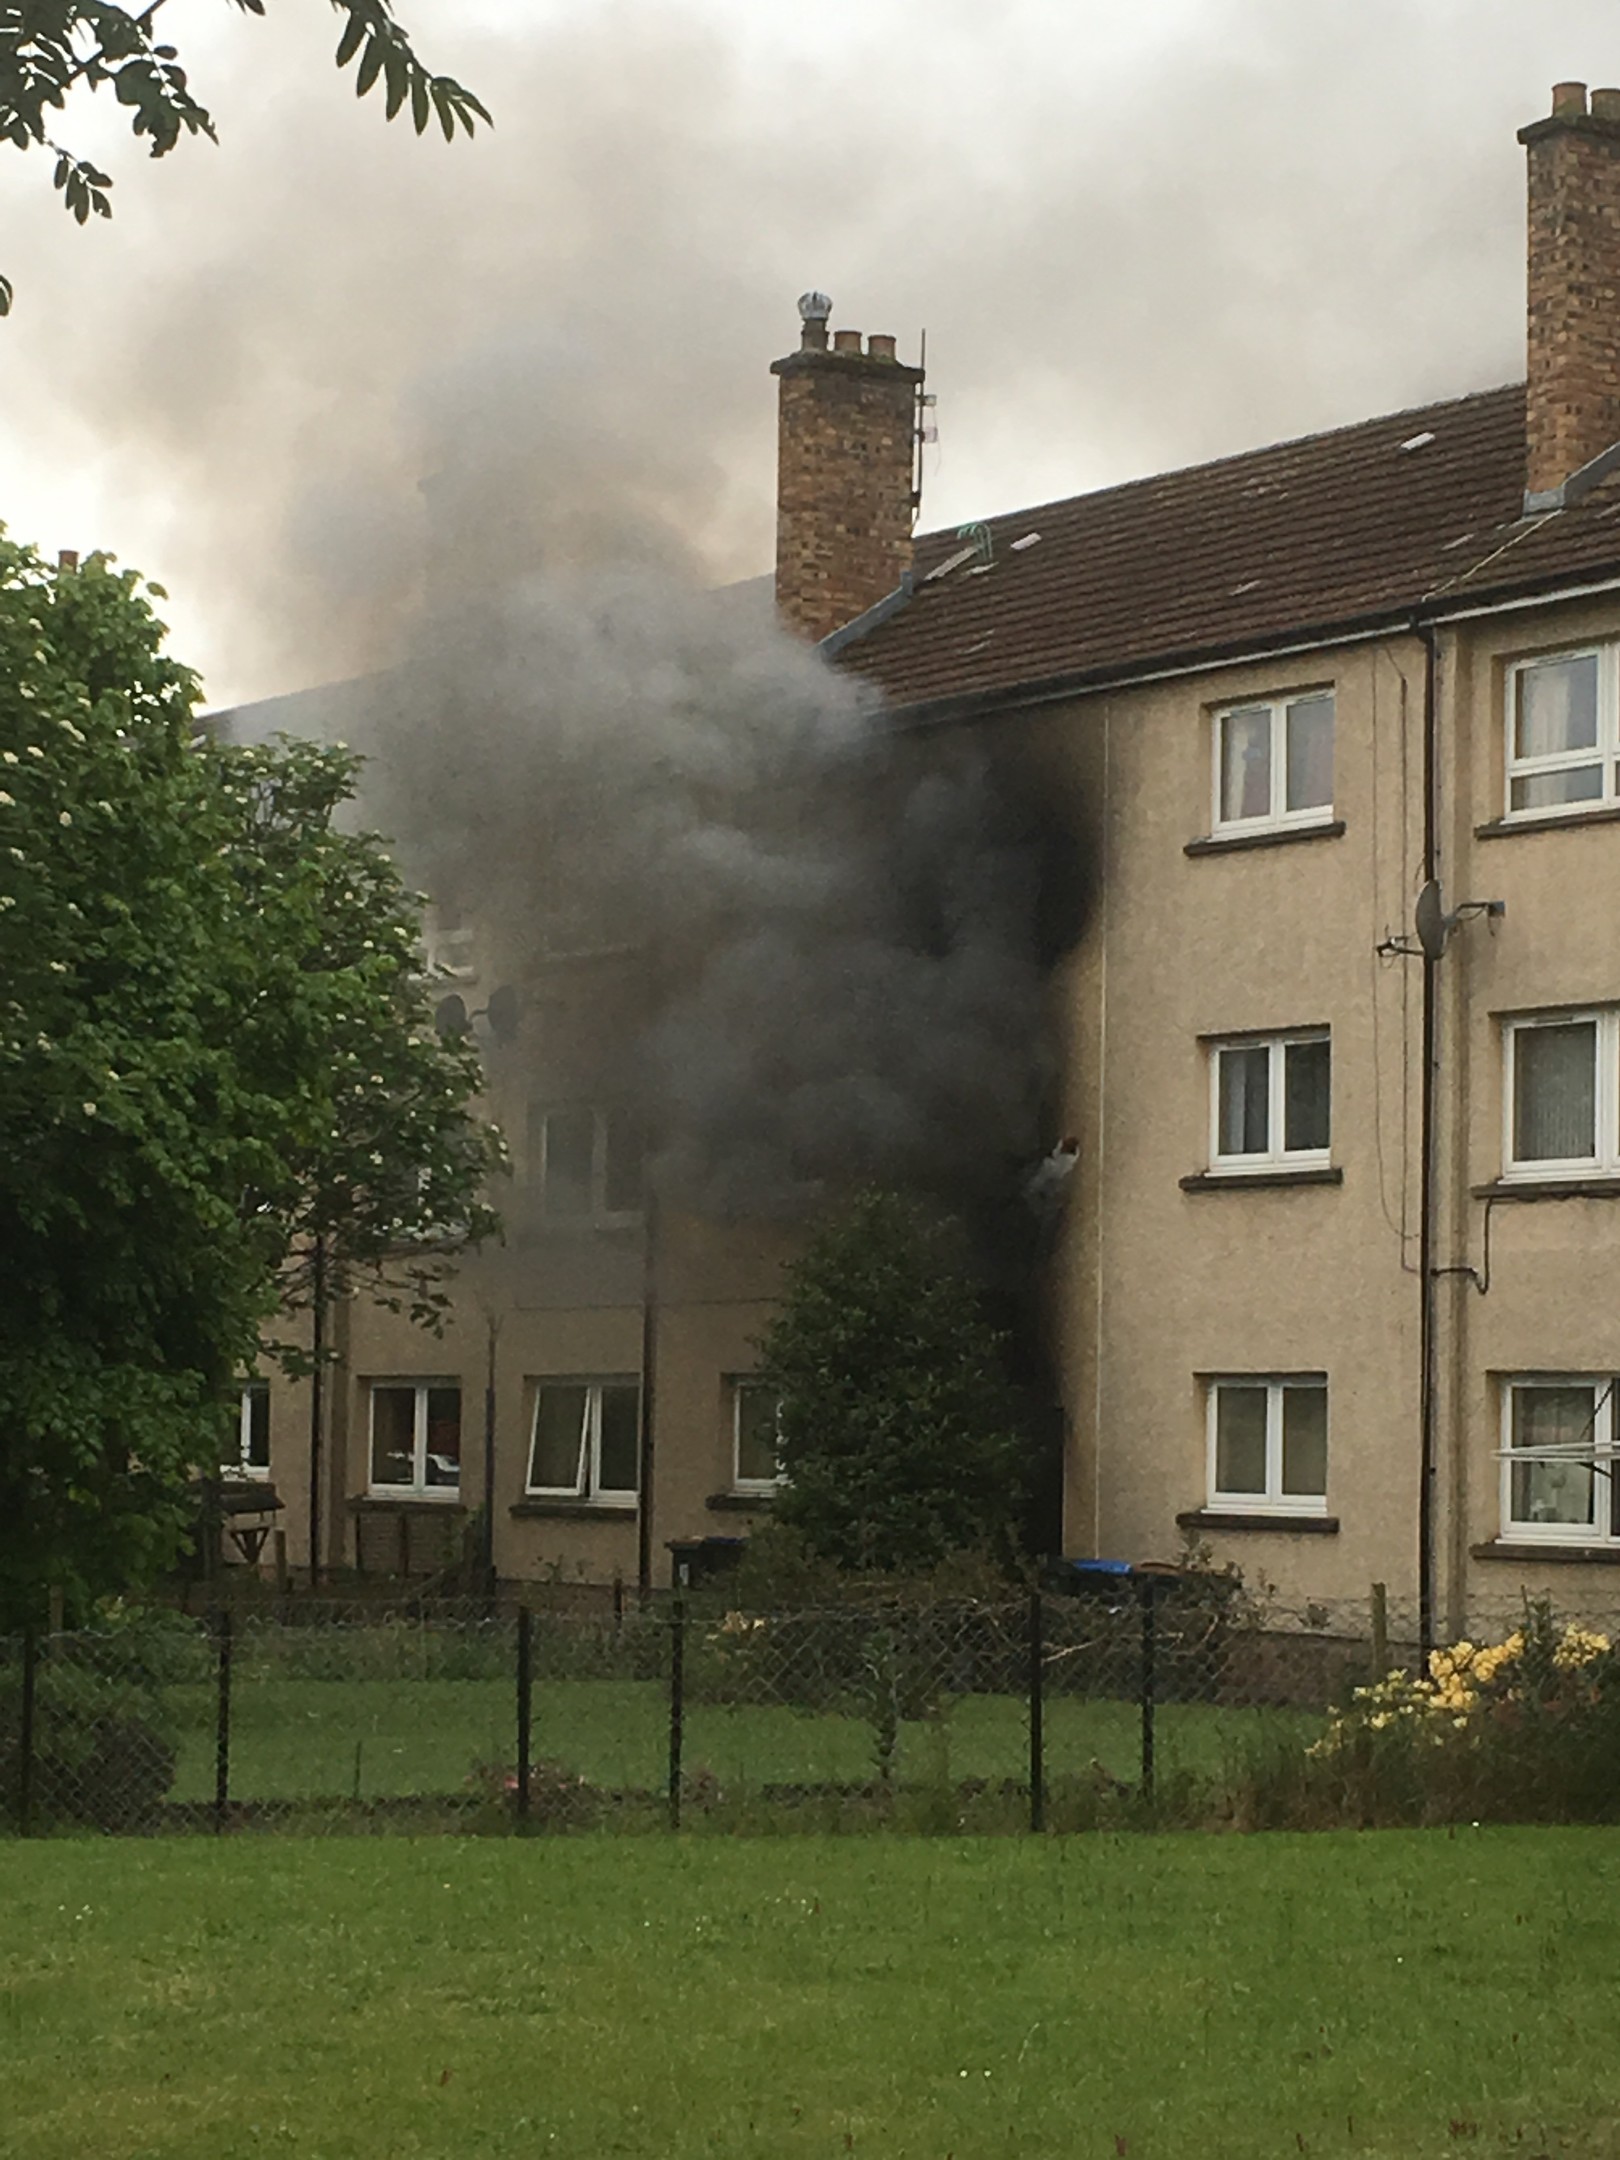 Smoke was seen billowing from the building on Friday evening